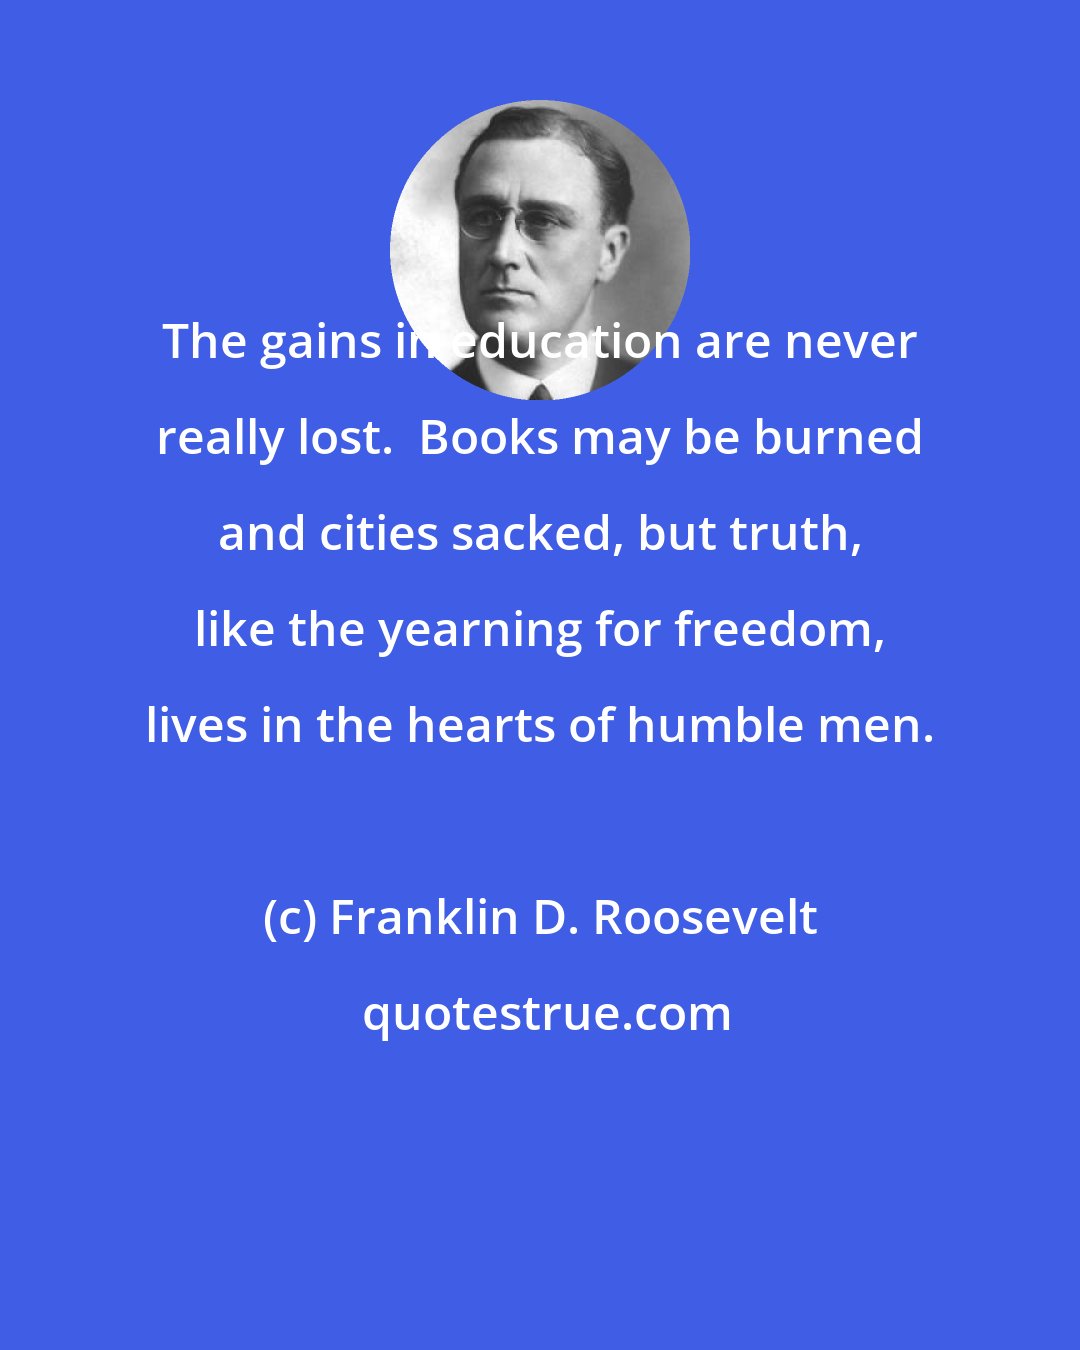 Franklin D. Roosevelt: The gains in education are never really lost.  Books may be burned and cities sacked, but truth, like the yearning for freedom, lives in the hearts of humble men.